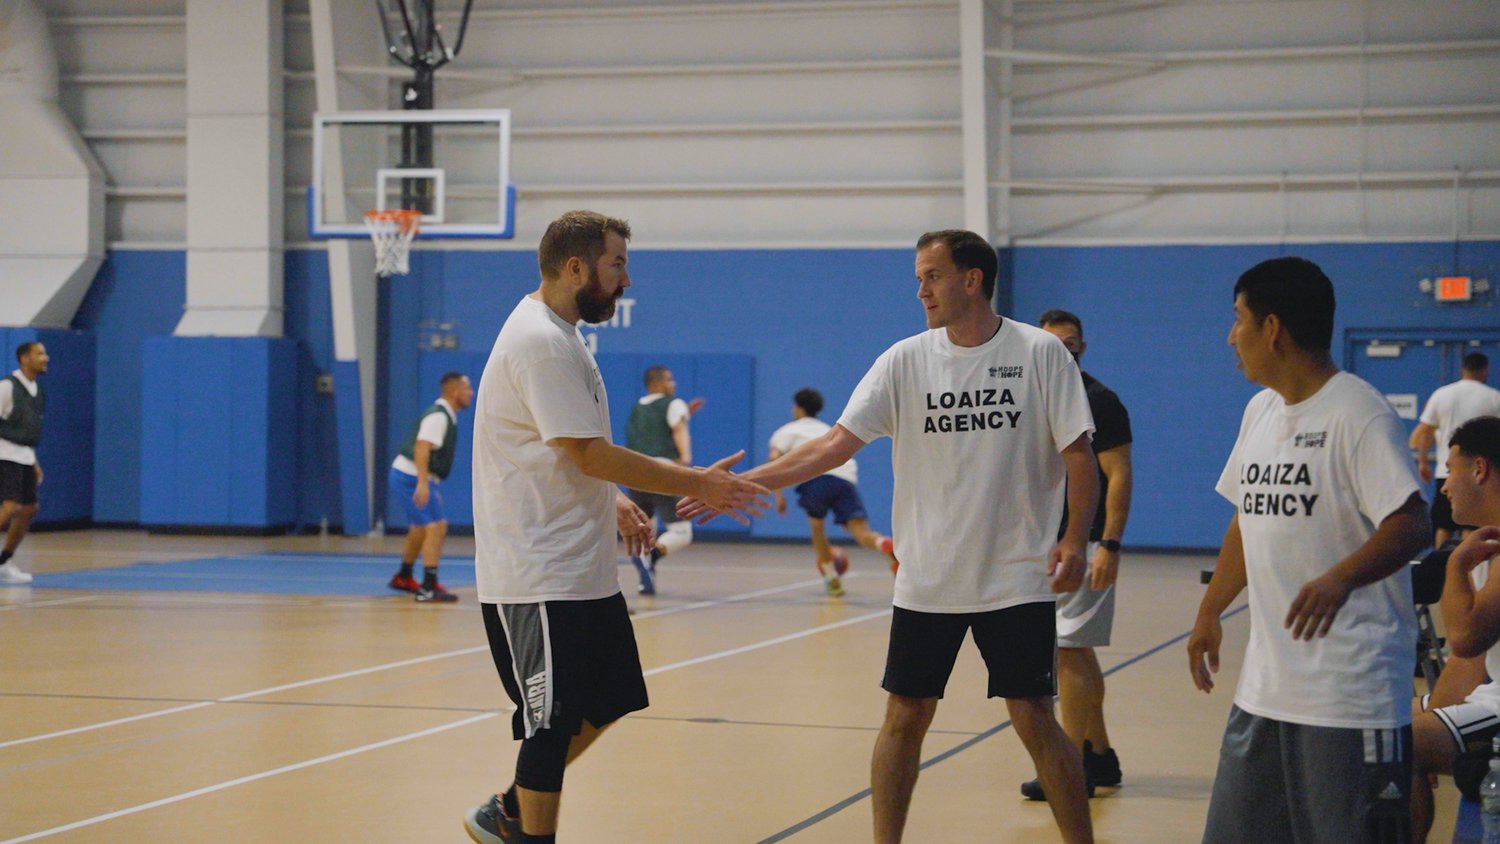 HIGH FIVE: Matthew Patty, co-founder of Sept. 18’s Hoops for Hope charity basketball tournament, slaps hands with opponent Paul Giblin as teammate Rich Saban looks on. Hoops for Hope, which was held at the Indoor Recreation Center in Johnston, raised a total of $6,000 for local causes.